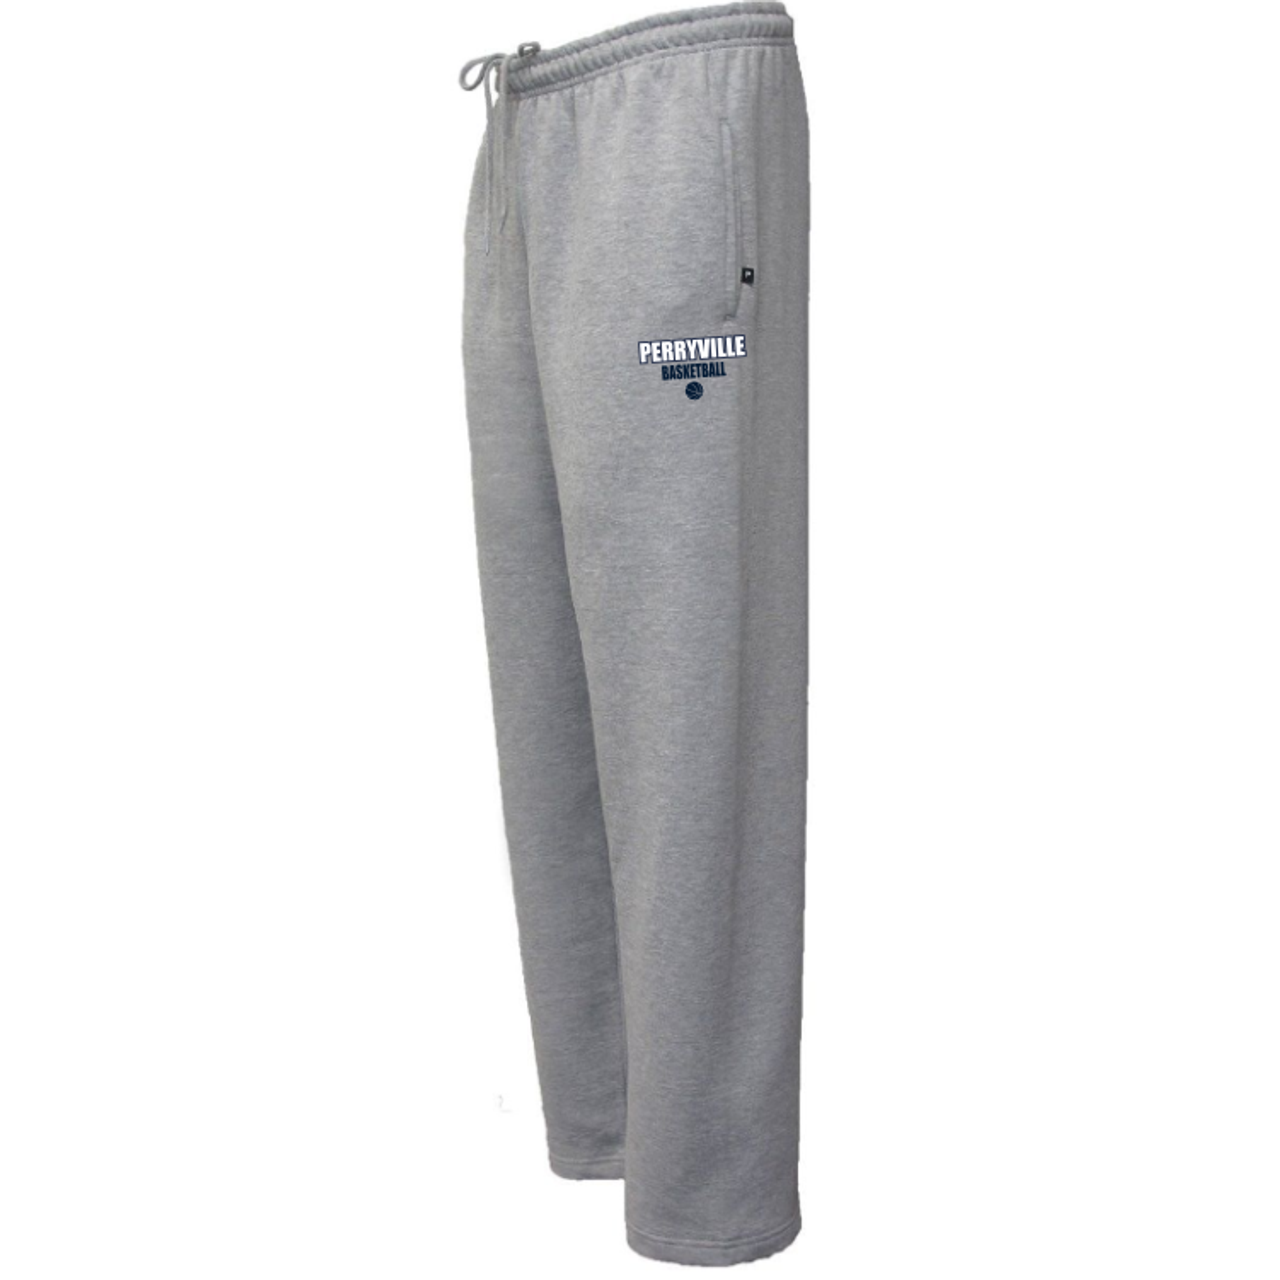 Perryville MS Basketball Sweatpant, Gray